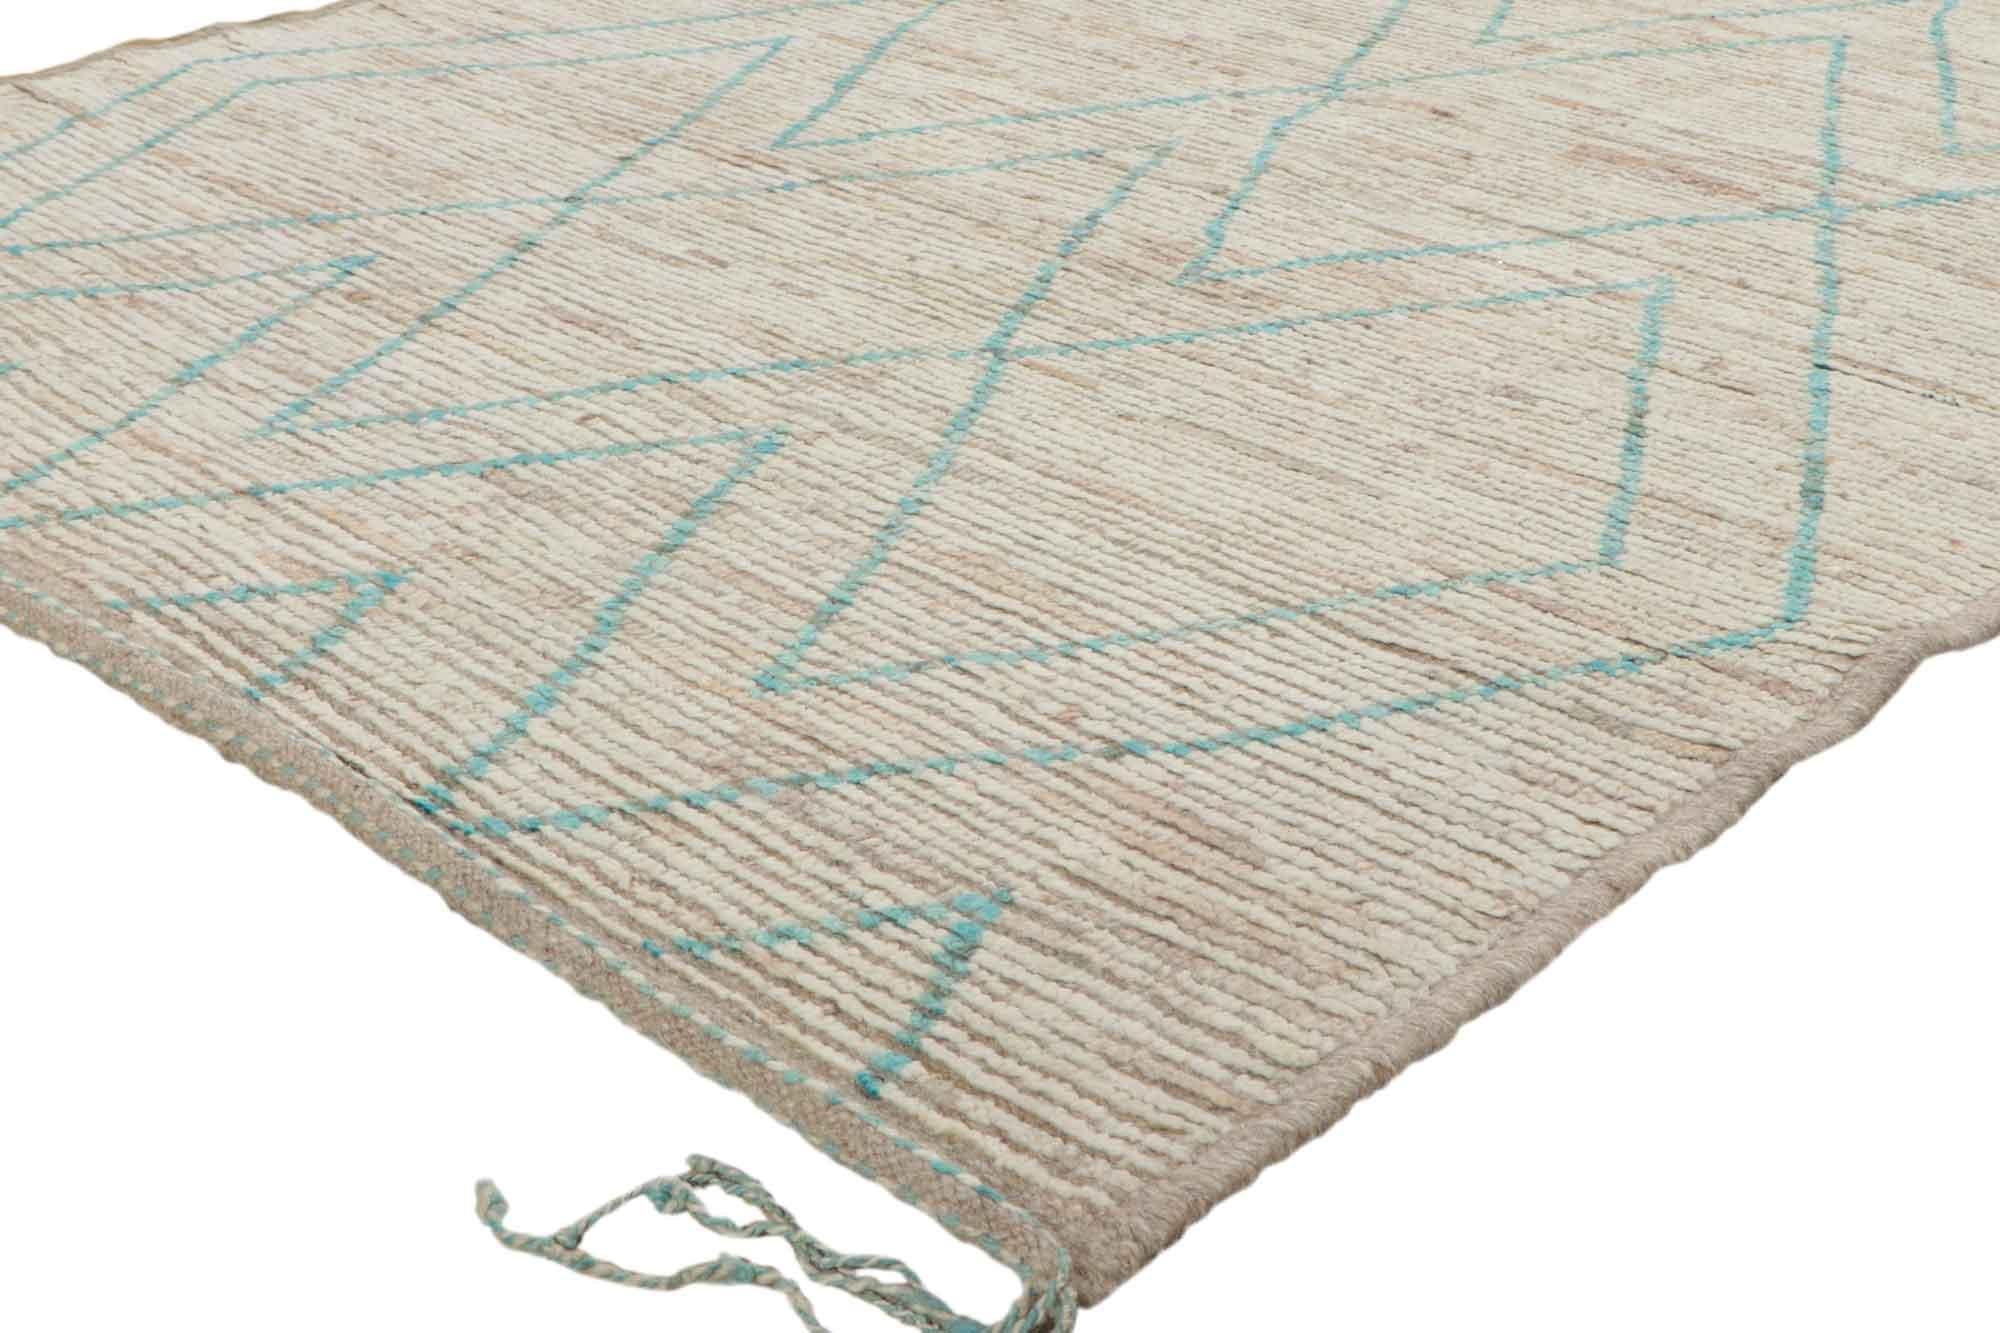 80783 New Moroccan rug with Short Pile 05'00 x 06'08. With its simplicity, incredible detail and texture, this hand knotted wool contemporary Moroccan rug is a captivating vision of woven beauty. The eye-catching geometric pattern and soft colors